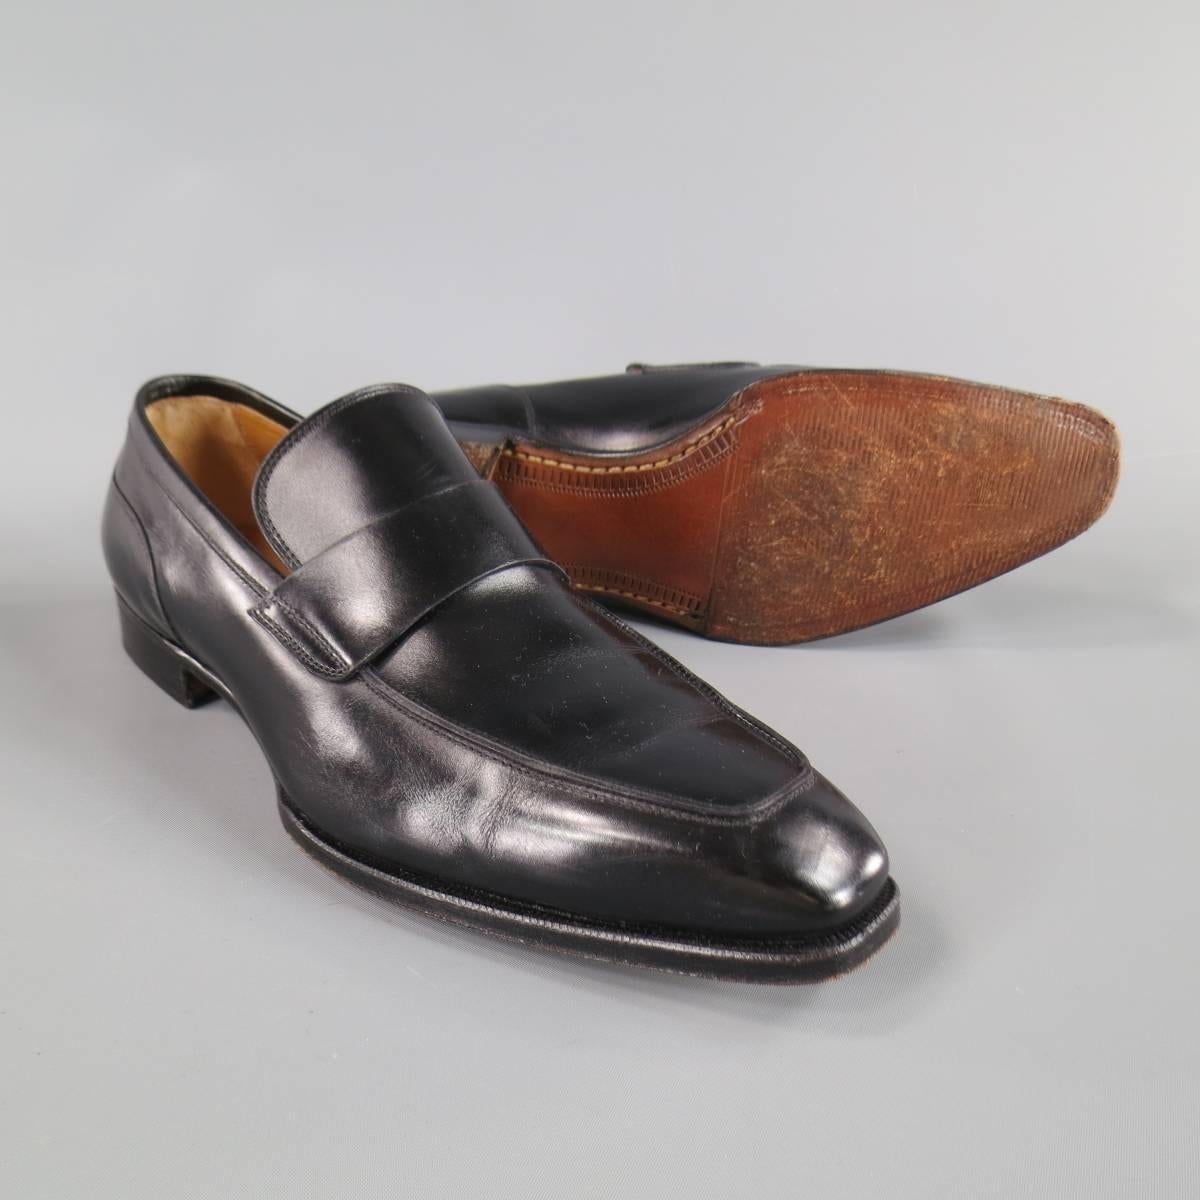 GRAVATI by WILKES BASHFORD Loafers consists of leather material in a black color tone. Designed in a square, moc toe front with tone-on-tone stitching and cut-out trim. Detailed with black leather sole. Made in Italy.
 
Excellent Pre-Owned Condition